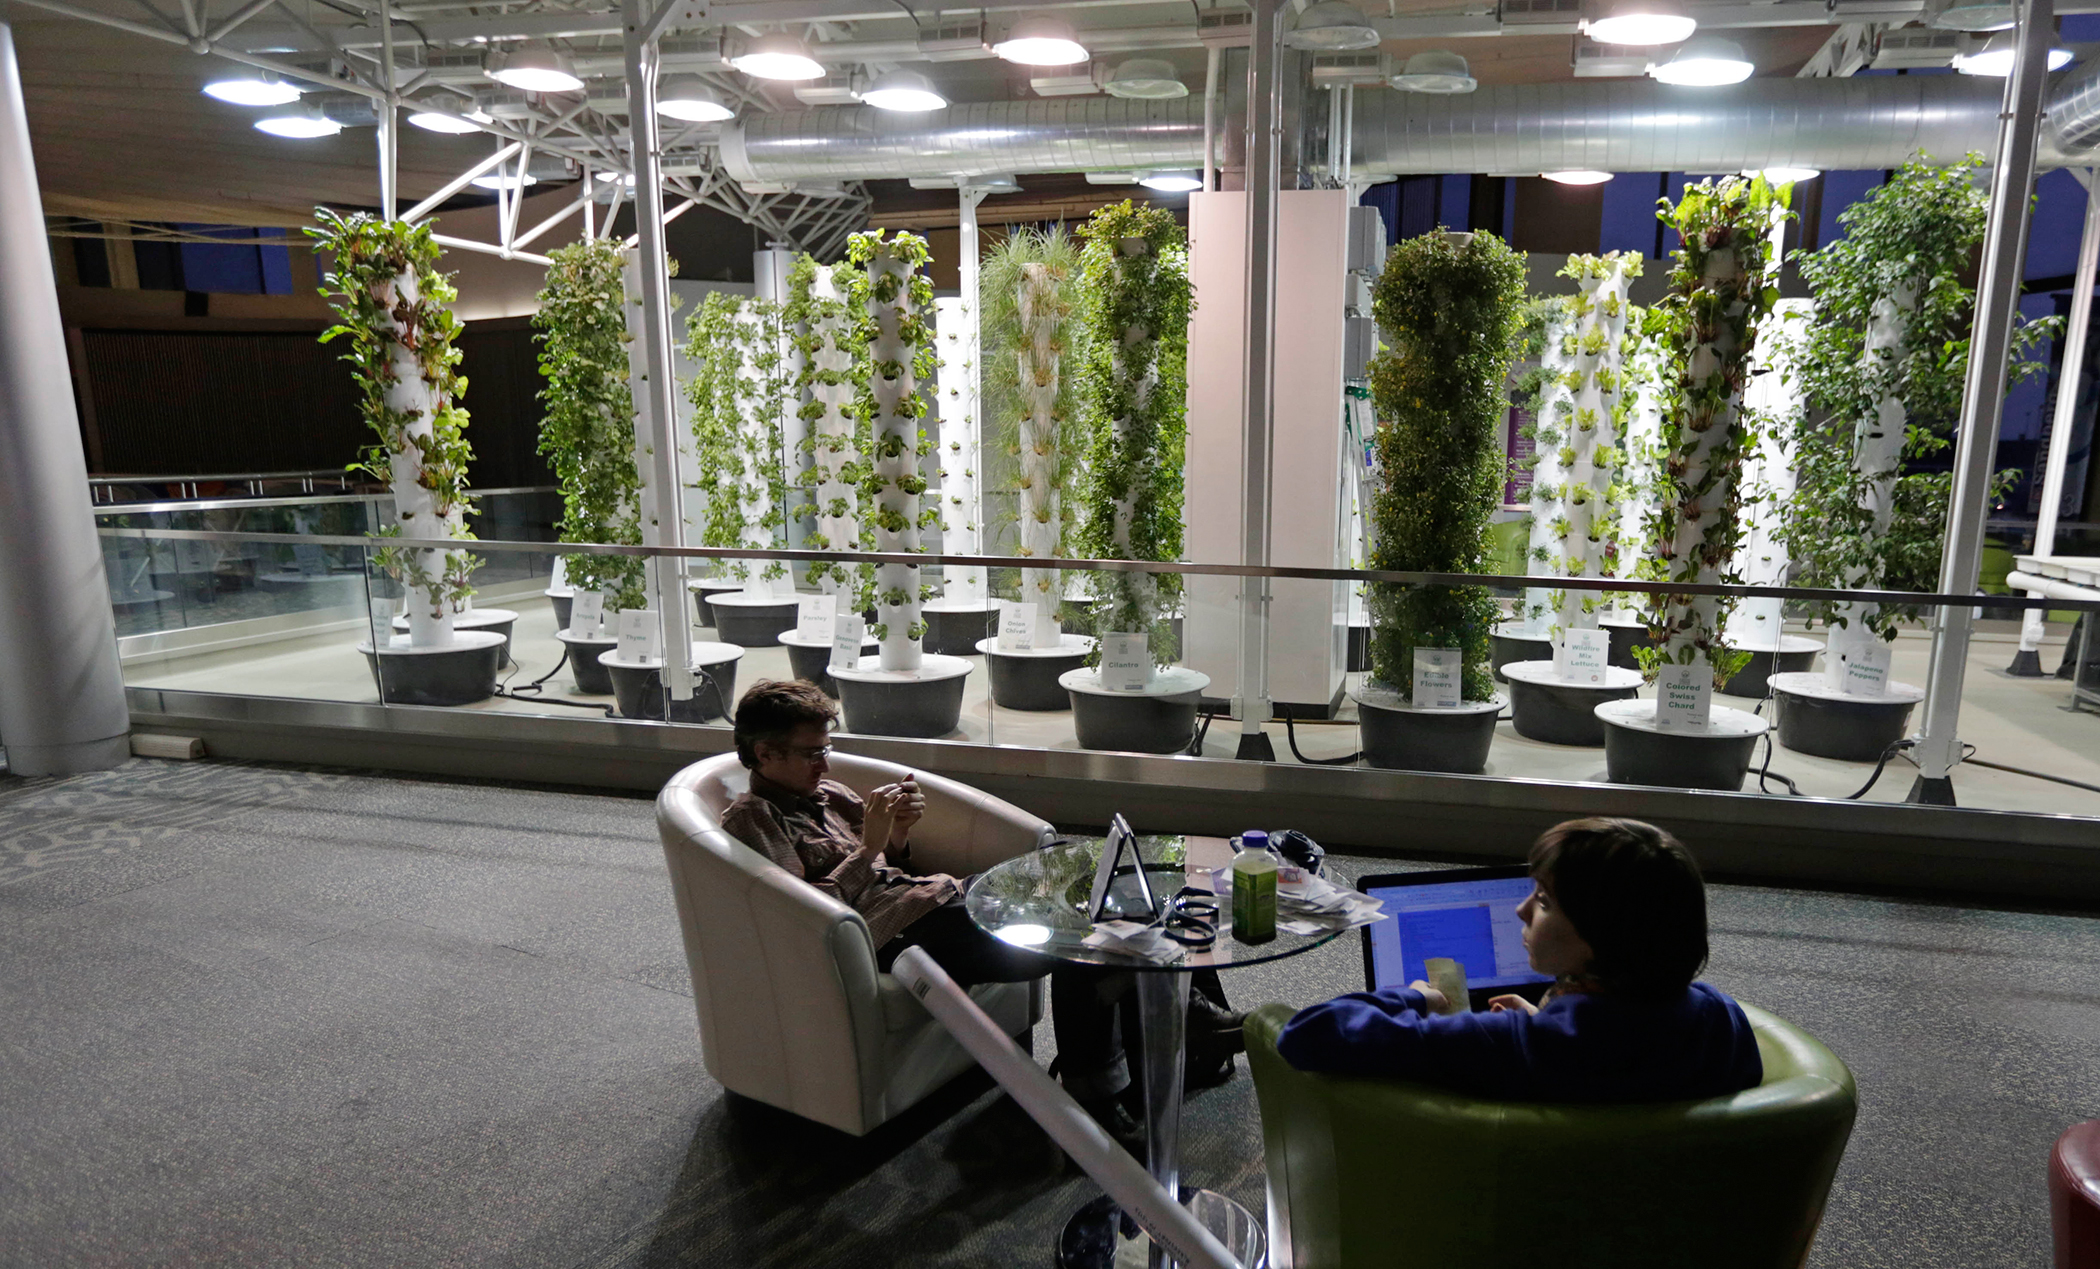 In this photo taken December 18, 2012, at O'Hare International Airport in Chicago, travelers David Janesko and Tess Menotti relax between flights next to O'Hare's Urban Garden where fresh herbs are grown and used in airport restaurants. Getting stranded at an airport once meant camping on the floor and enduring hours of boredom in a kind of travel purgatory with nothing to eat but fast food. Tough economic times are helping drive airports to make amends and transform terminals with a bit of bliss: spas, yoga studios, luxury shopping and restaurant menus crafted by celebrity chefs.